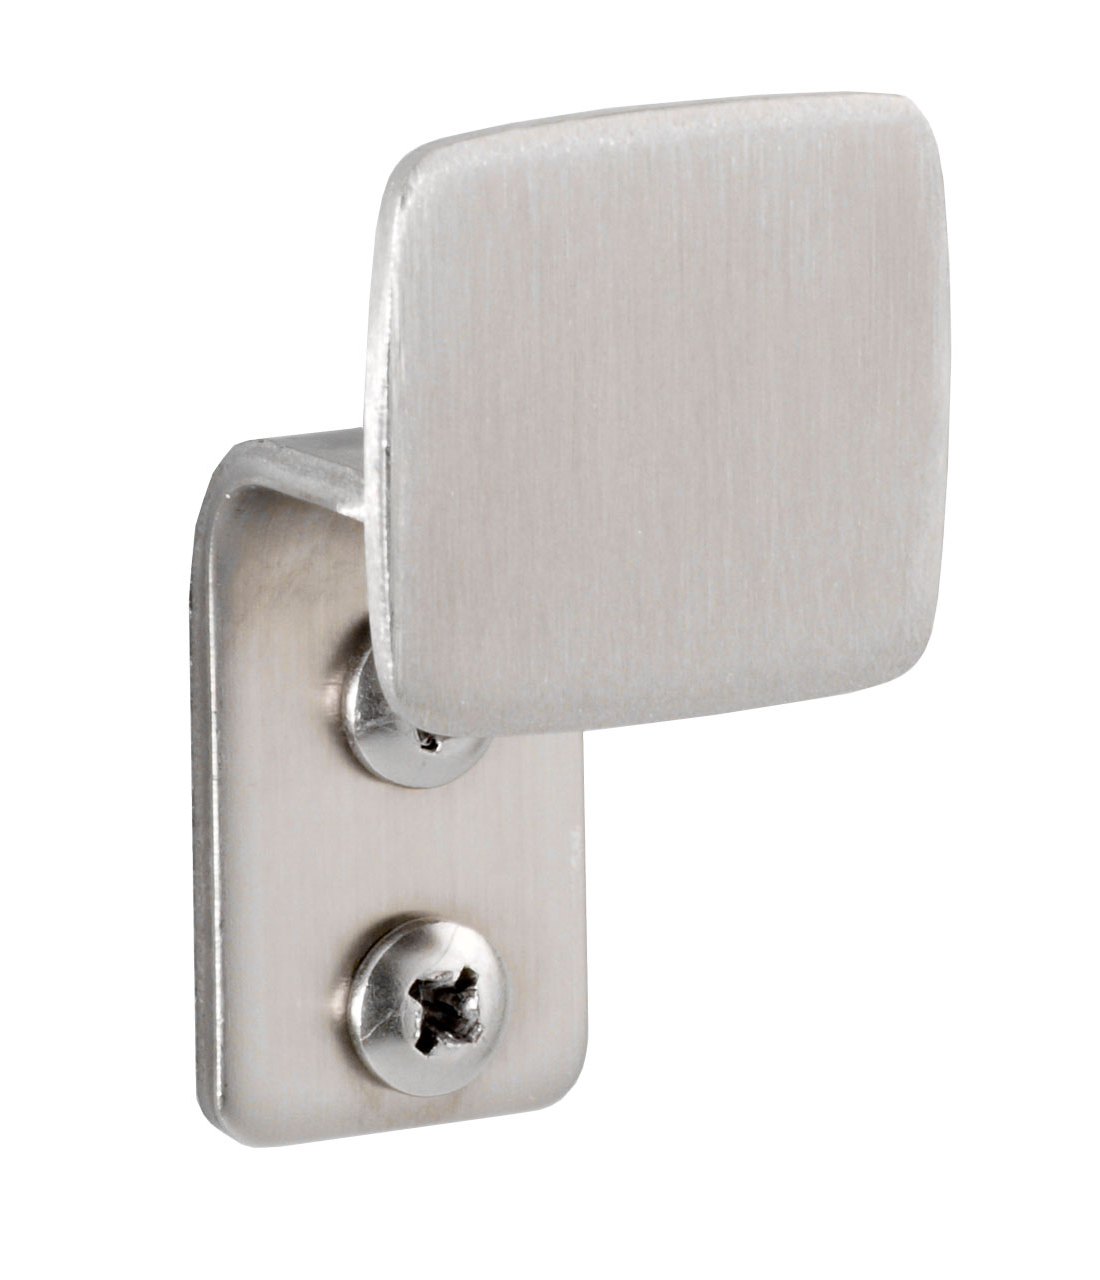 Clothes Hook Image